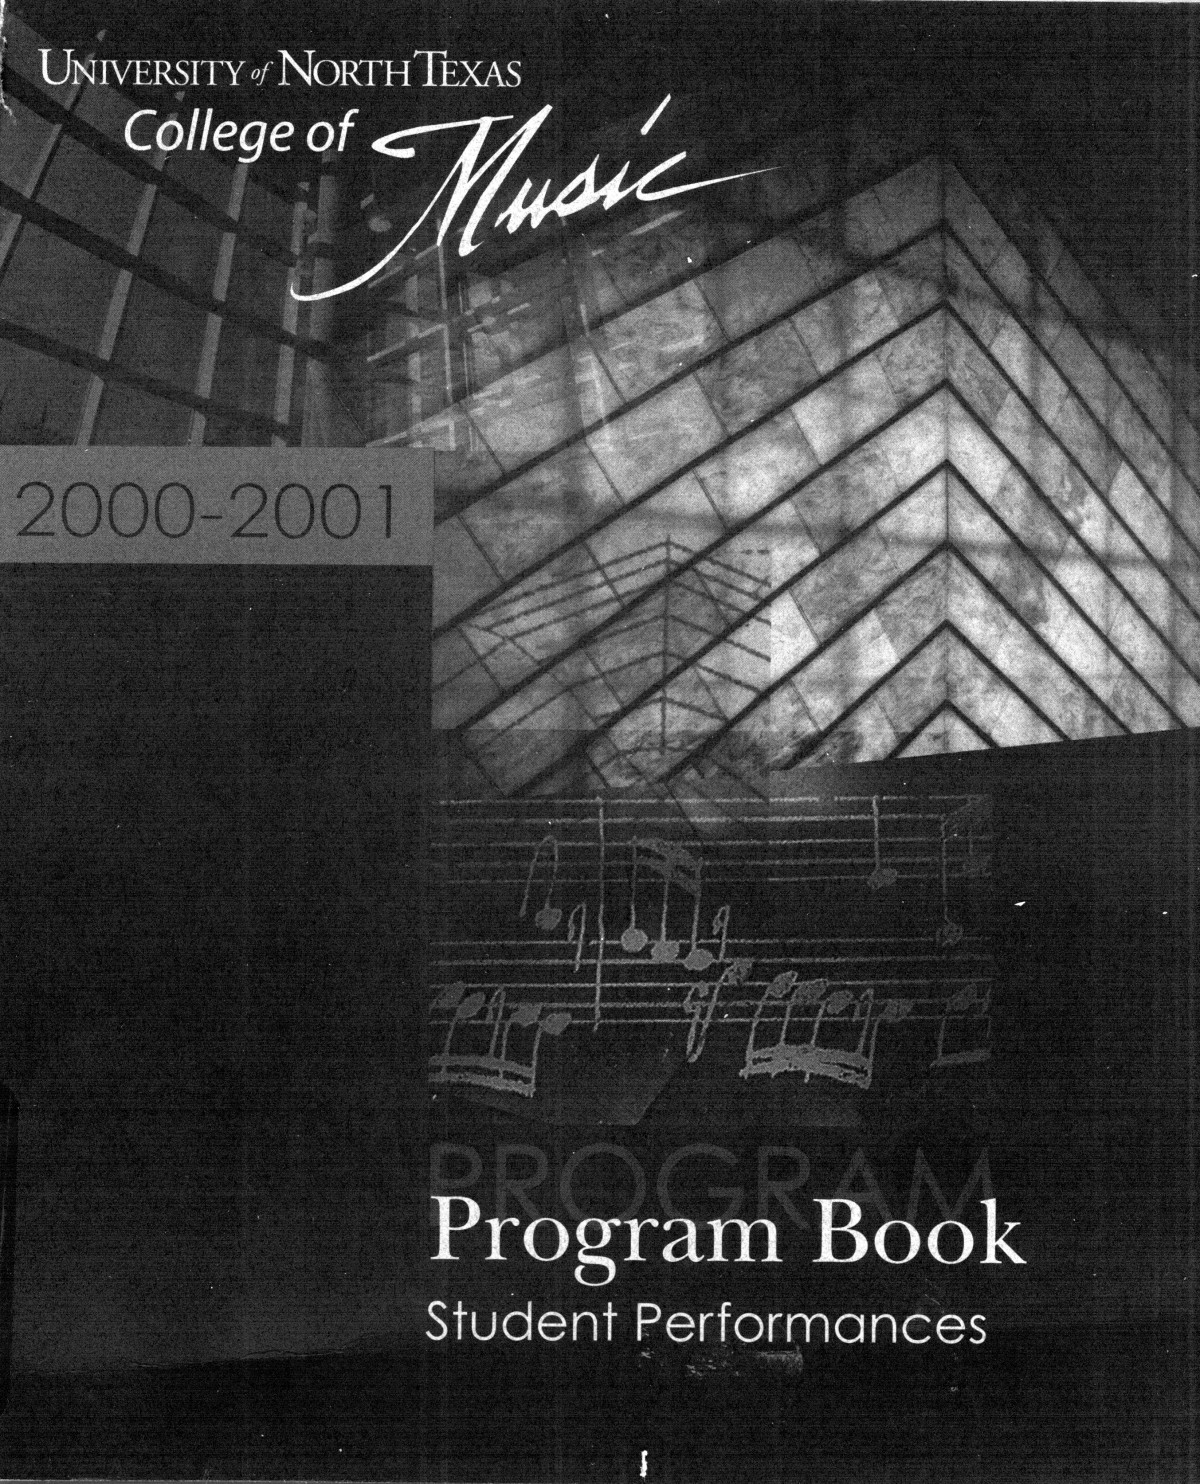 College of Music program book 2000-2001 Student Performances Vol. 2
                                                
                                                    [Sequence #]: 1 of 274
                                                